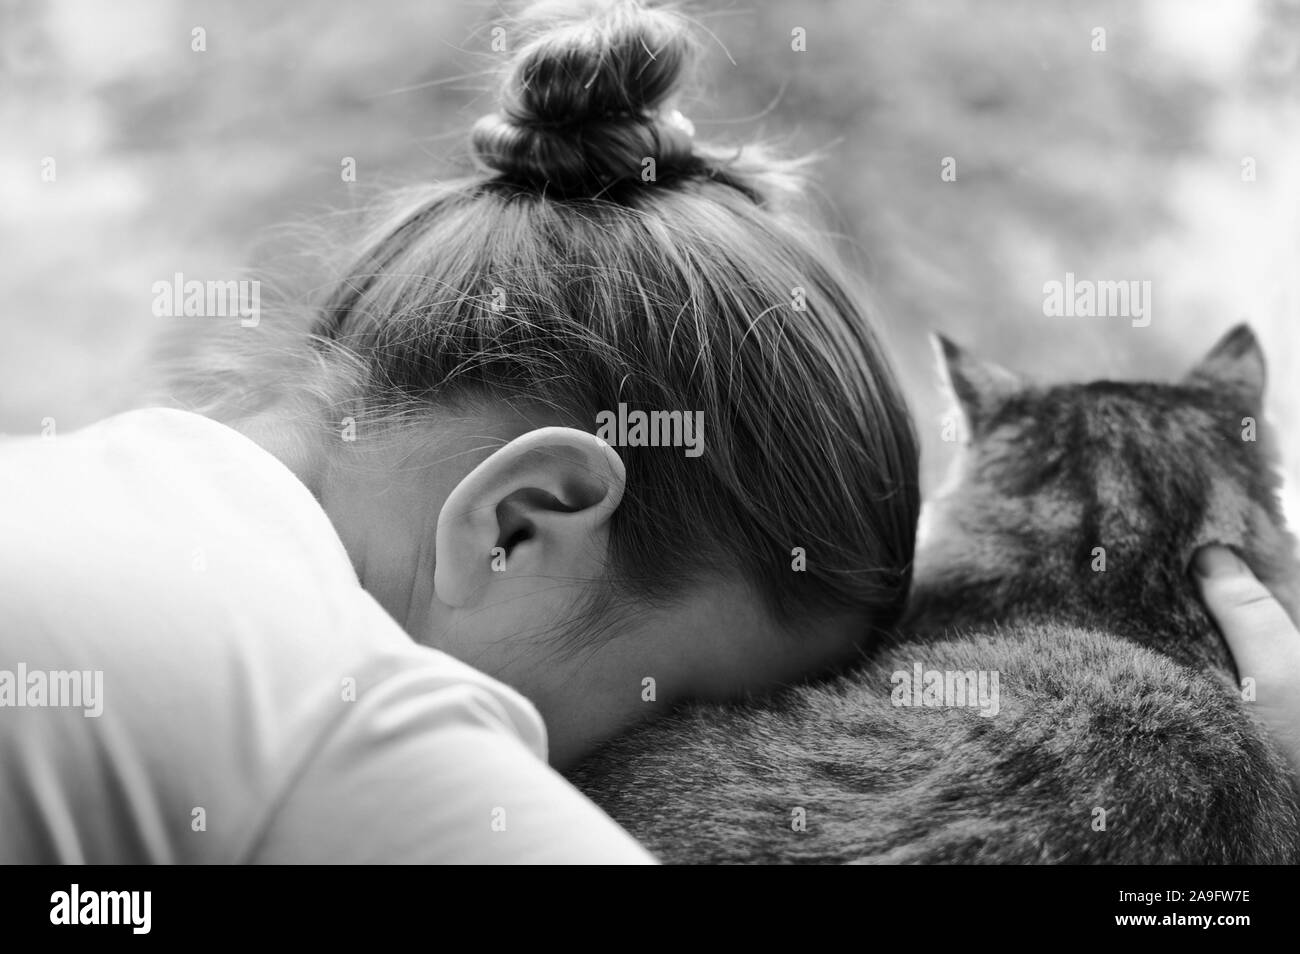 Sad girl with a cat  sits with her back to the camera. The girl leaned her head against the cat.Offended child. Black and white image.Horizontal. Stock Photo